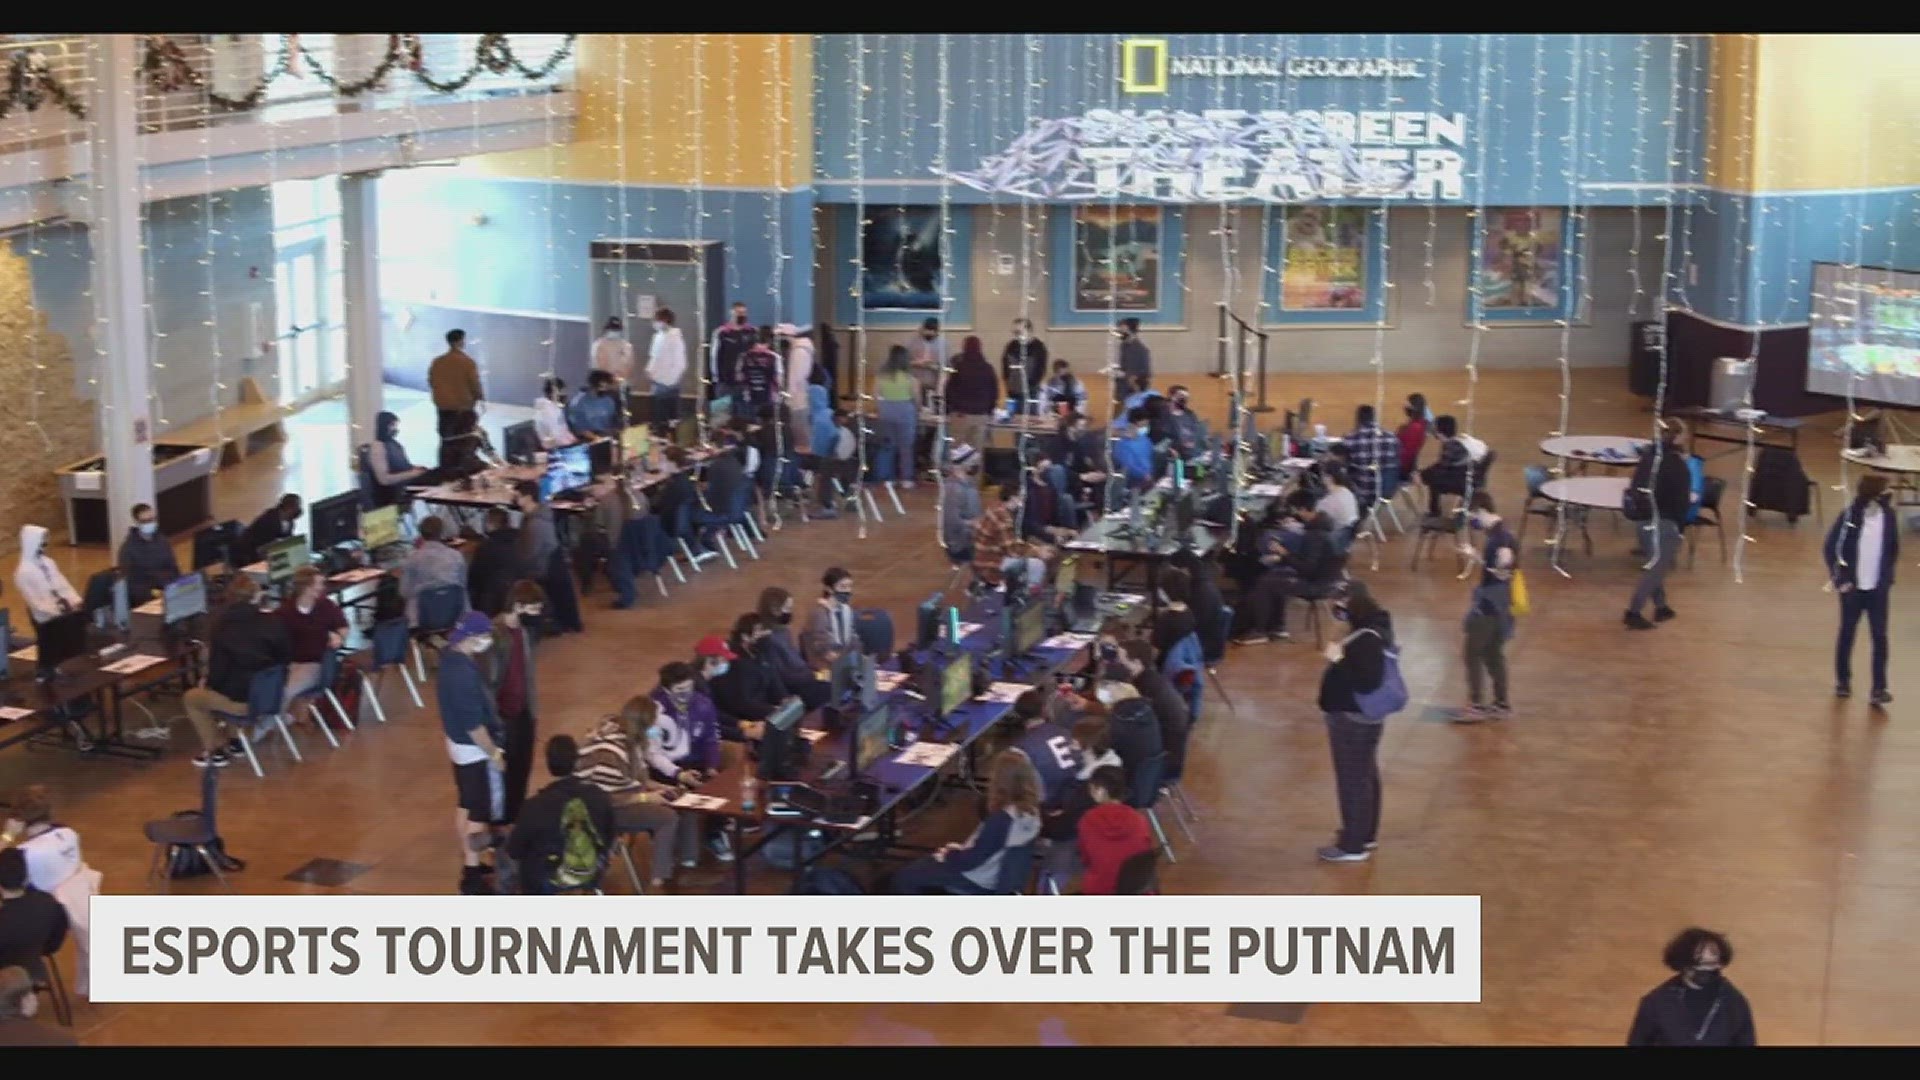 The 2-day tournament will be held at the Putnam Museum. During "Honeypot 6: Winter Is Coming" players will battle it out for cash prizes in a multitude of games.